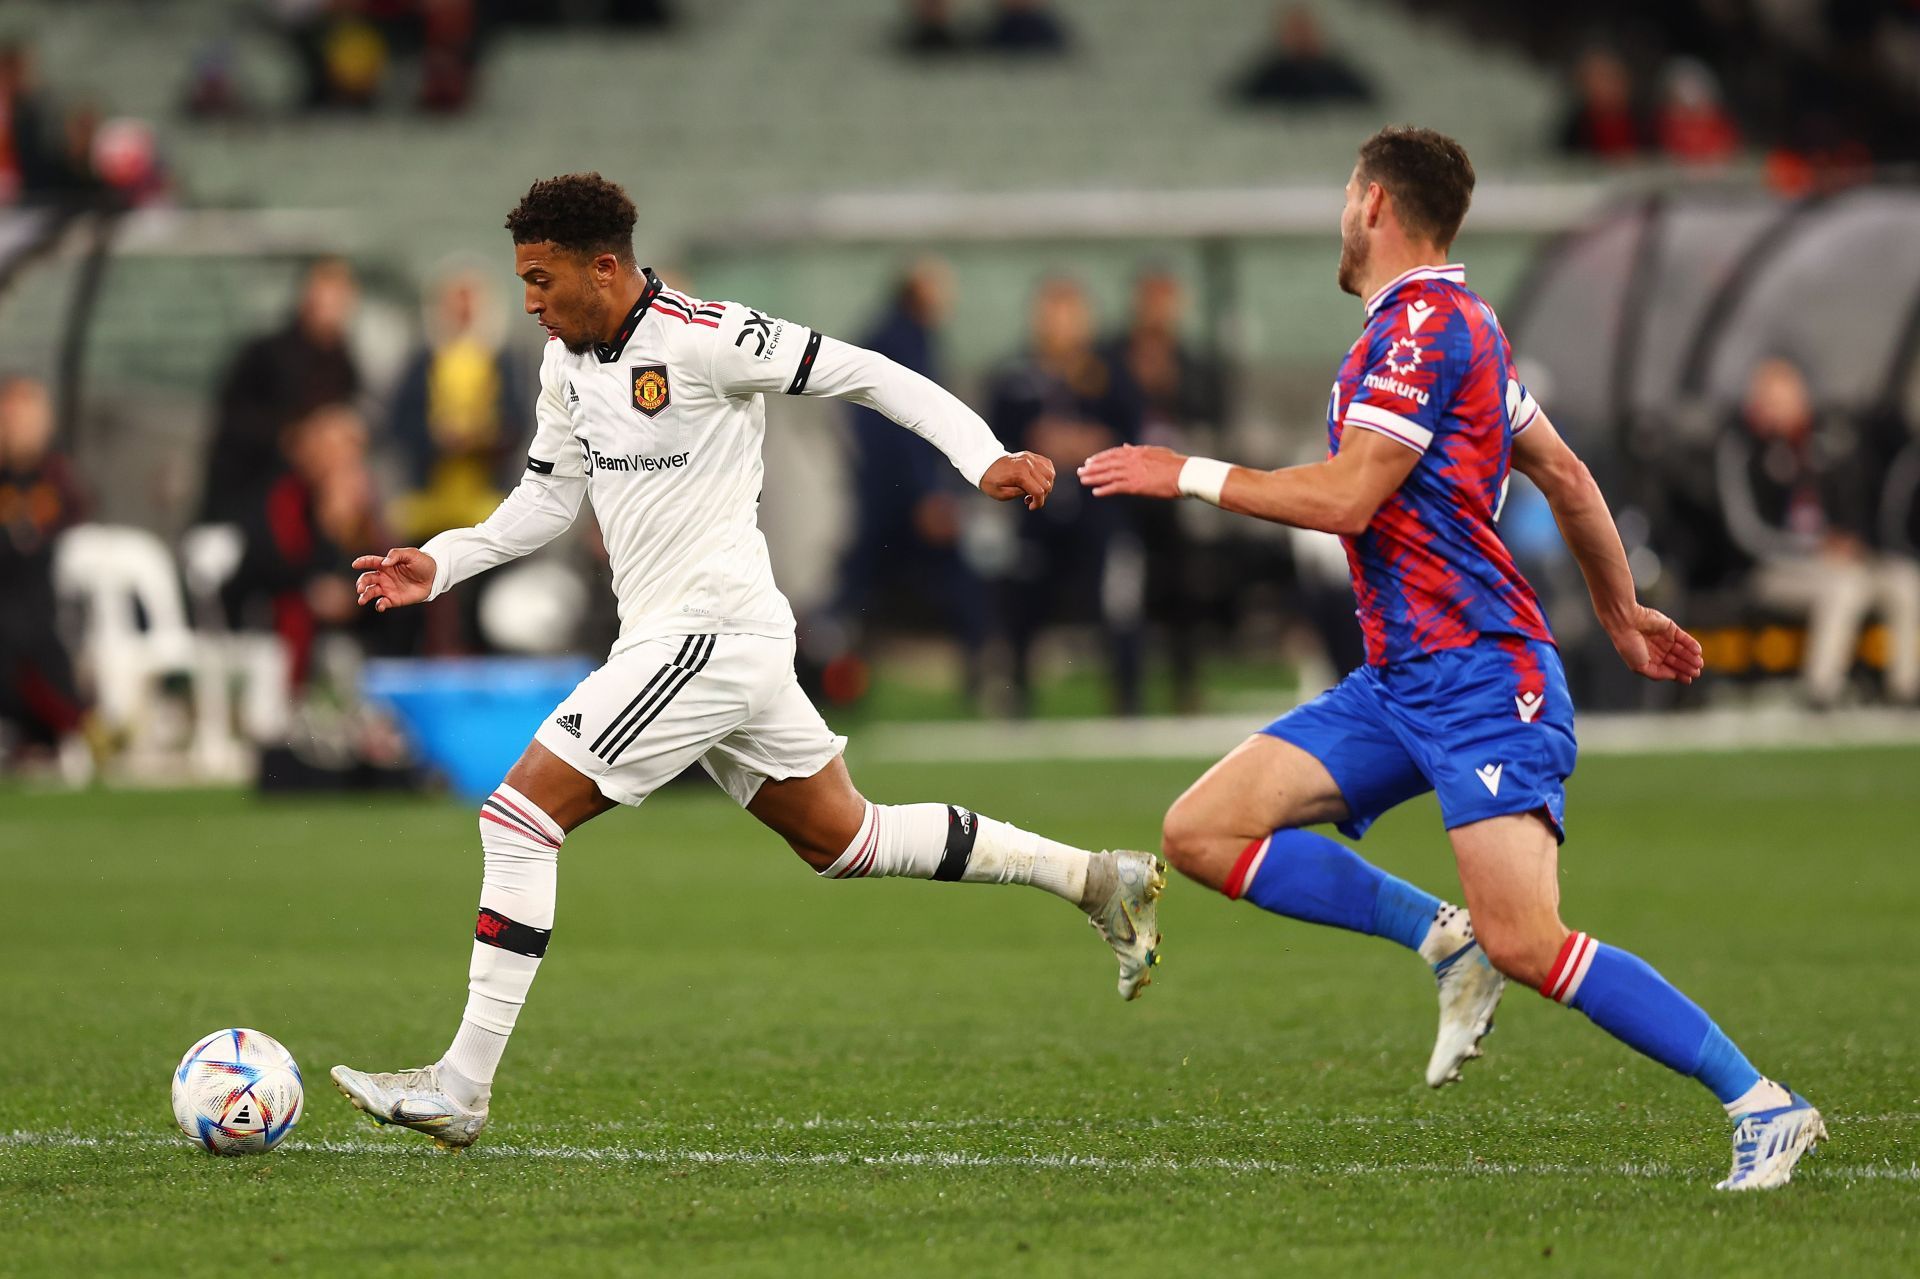 Manchester United winger Jadon Sancho in action against Crystal Palace at the Melbourne Cricket Ground.